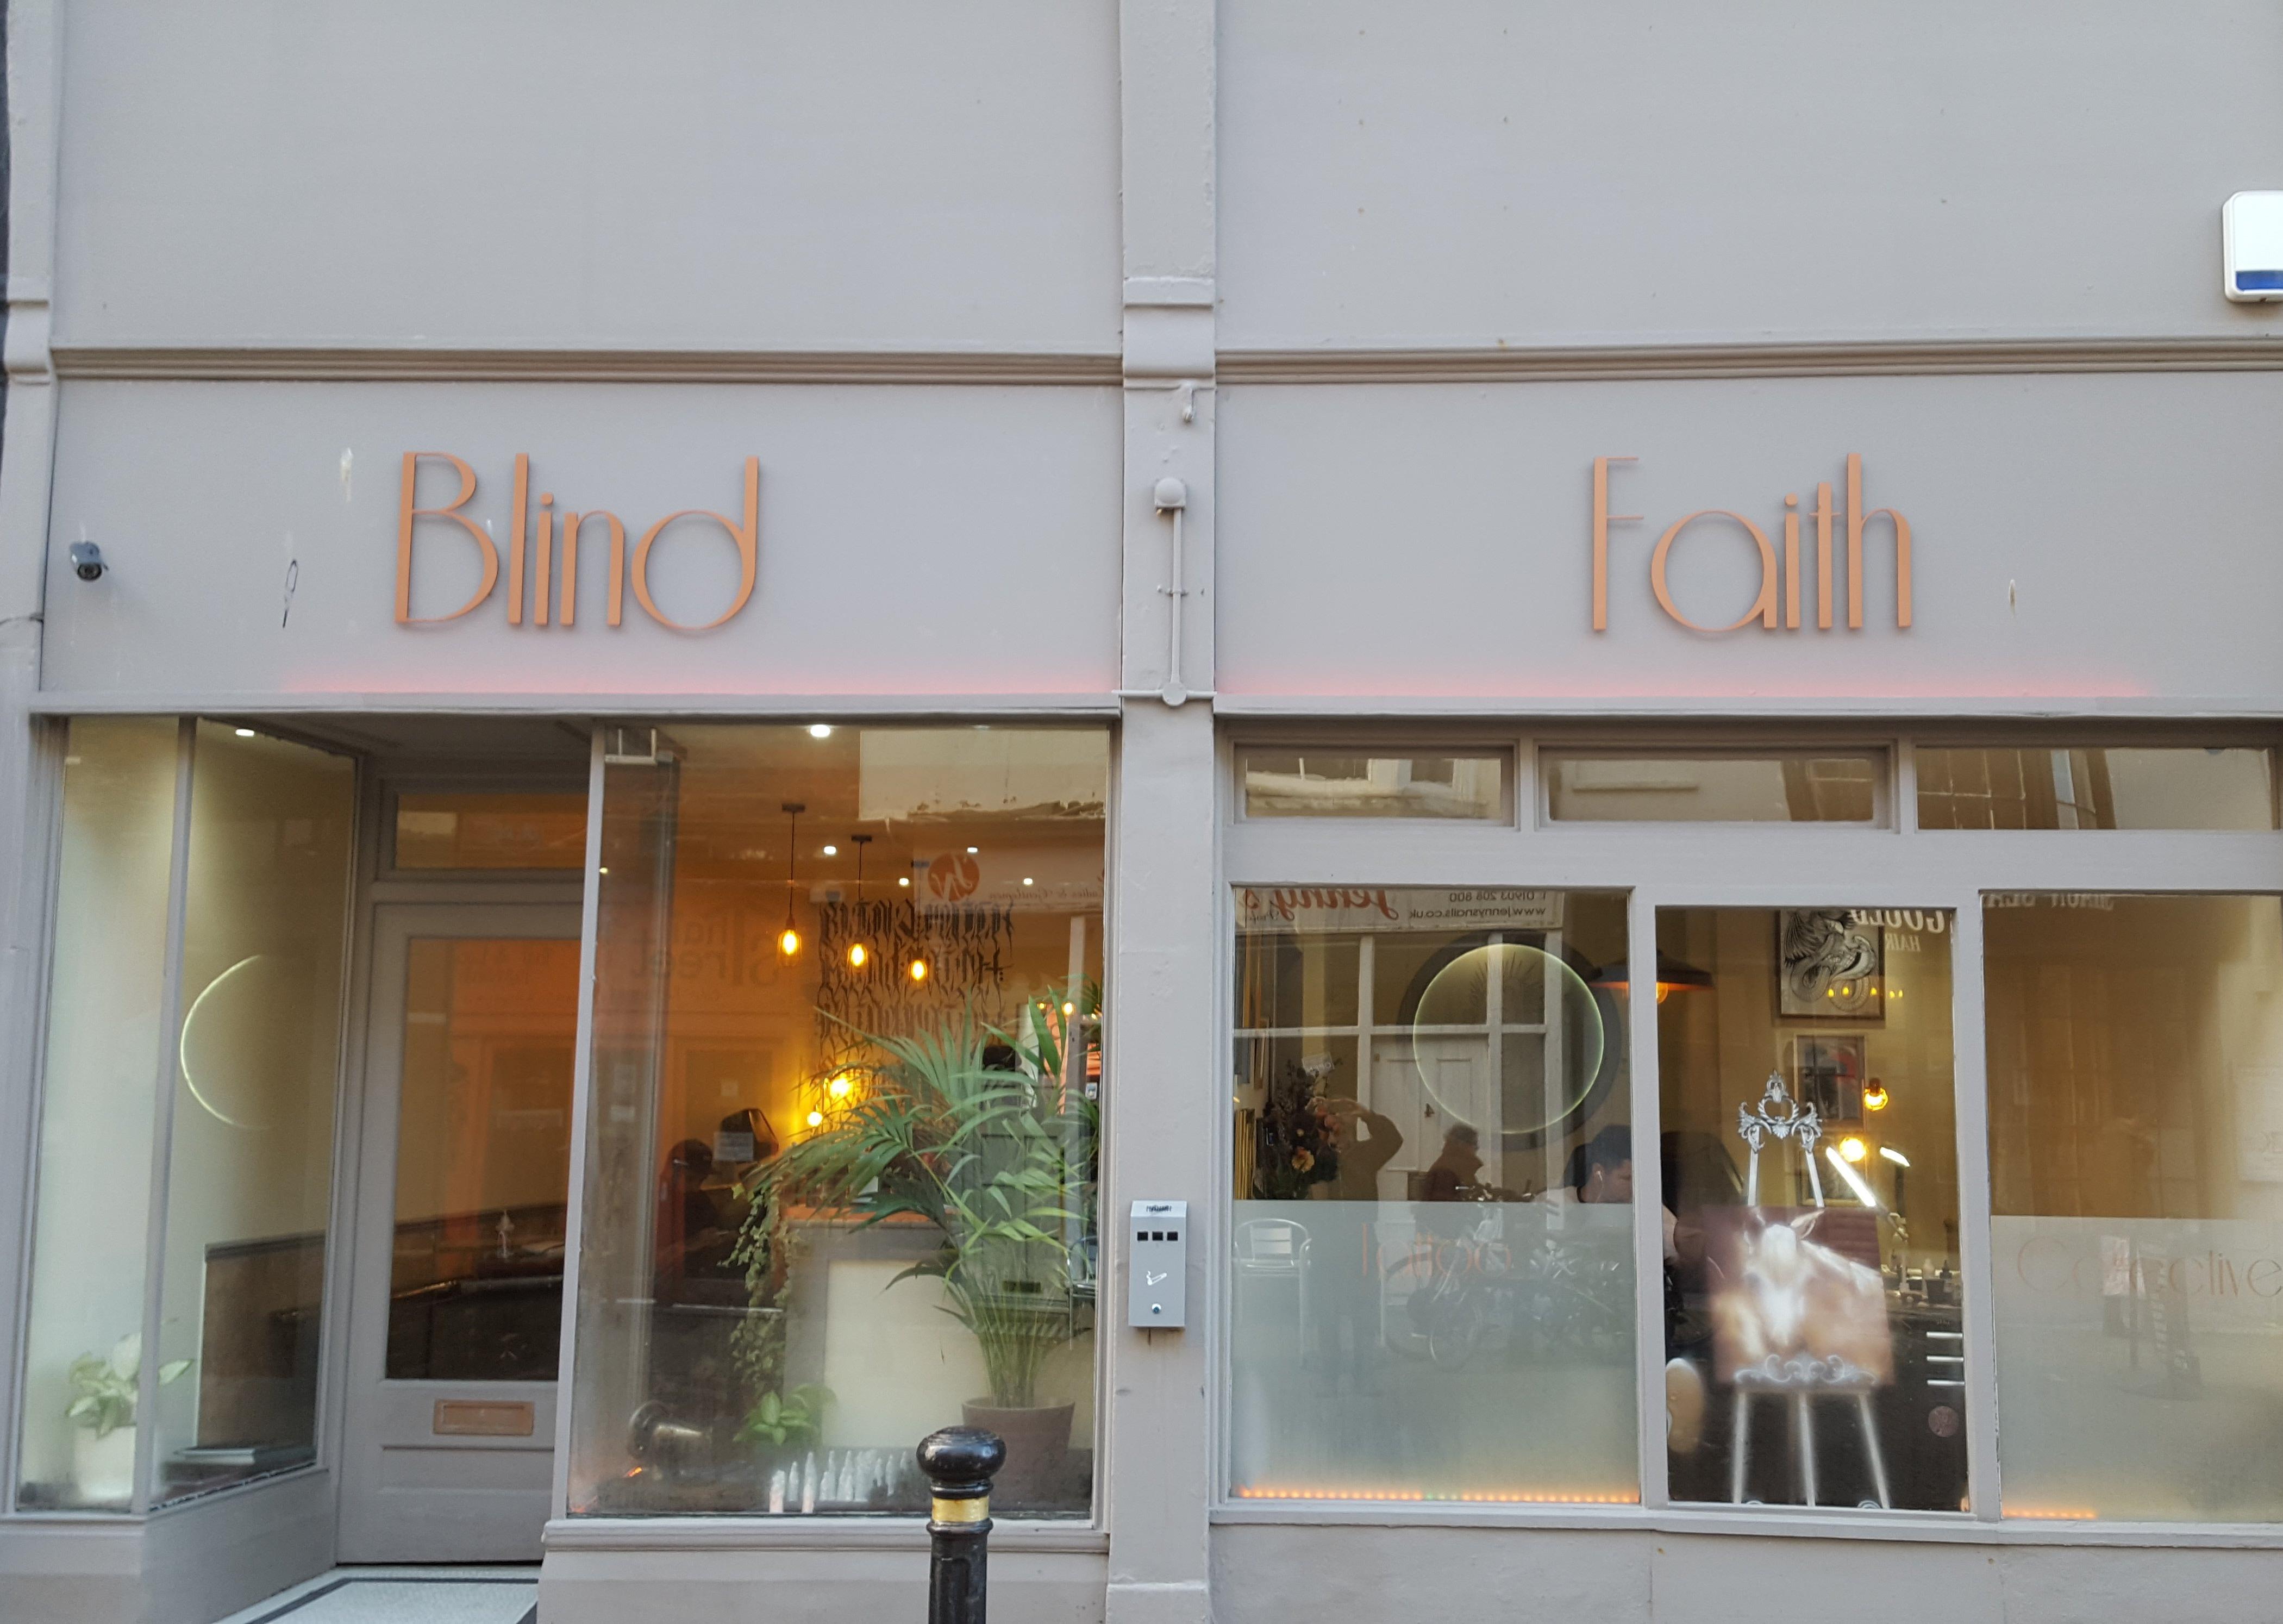 This collection of tattooists and body piercers opened in Bath Place in April 2019